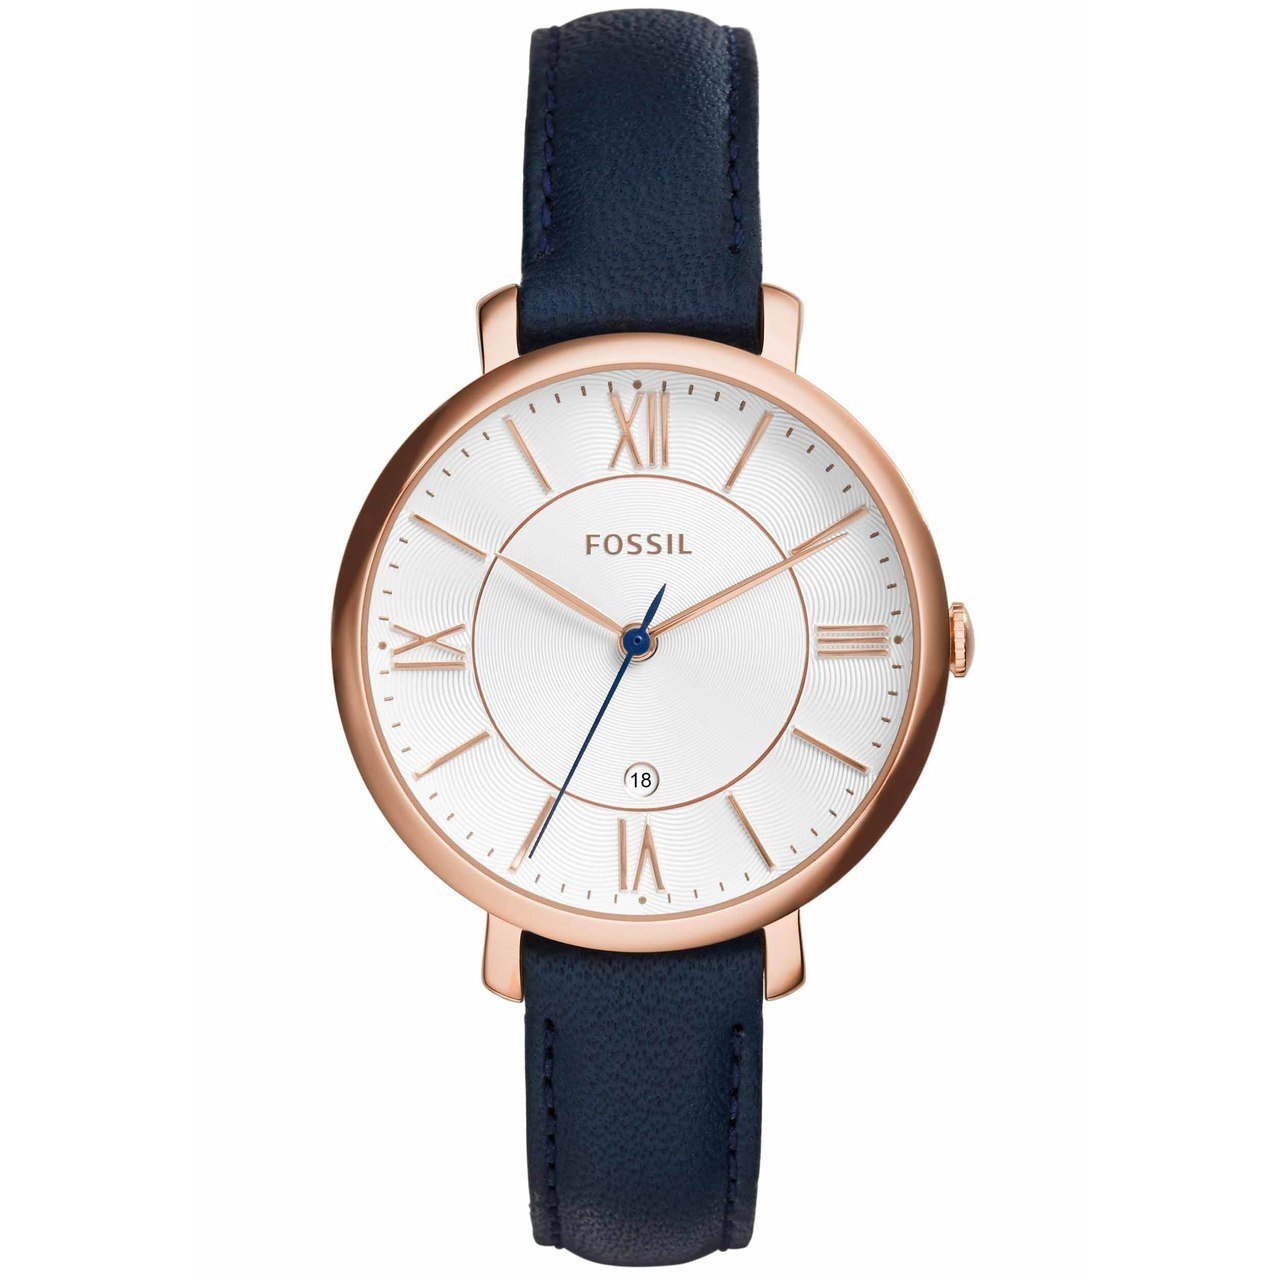 Fossil Jacqueline Rose Gold Navy Leather